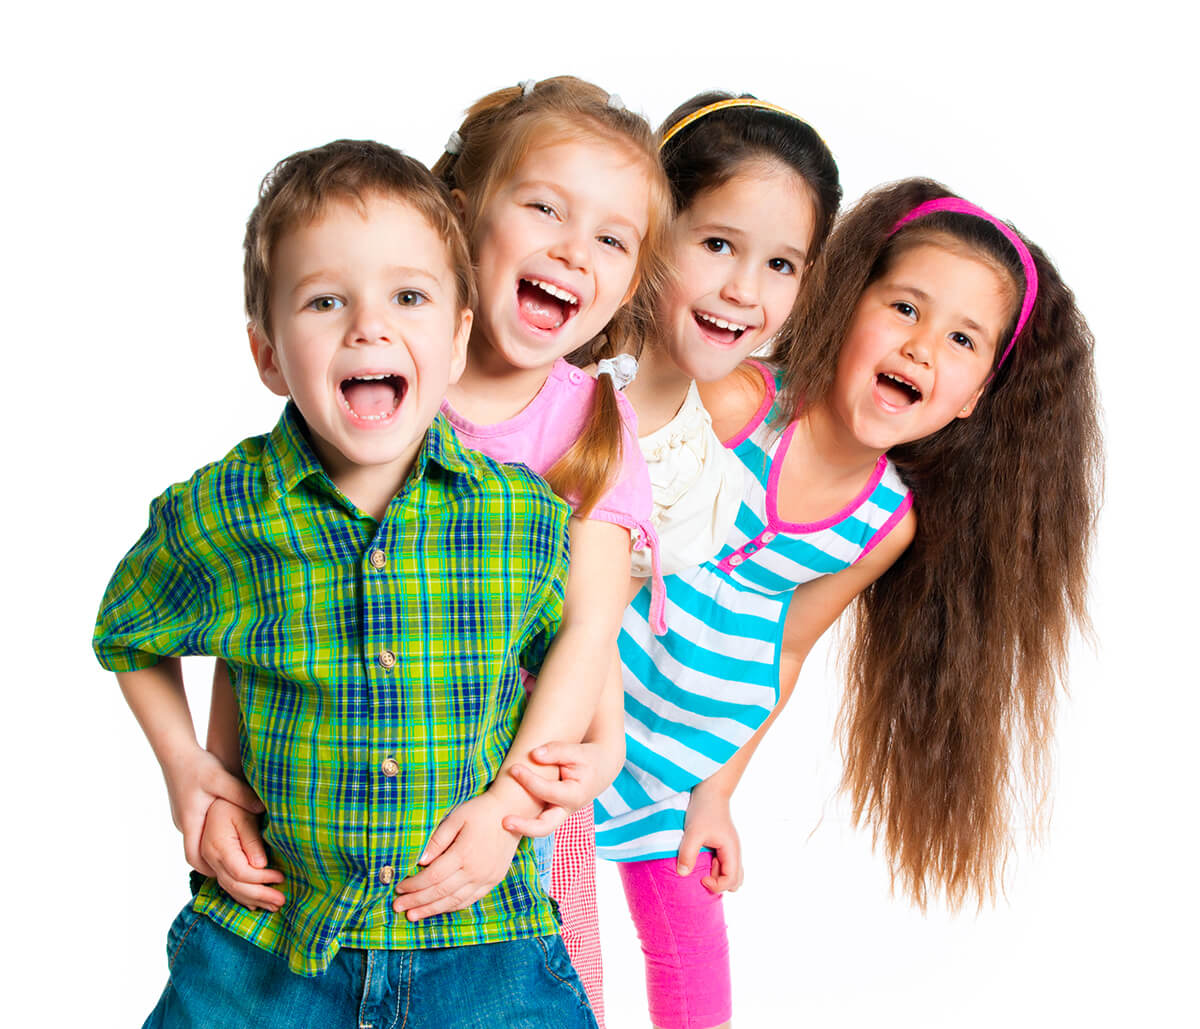 Childrens Teeth Cleaning in Hamilton Ontario Area